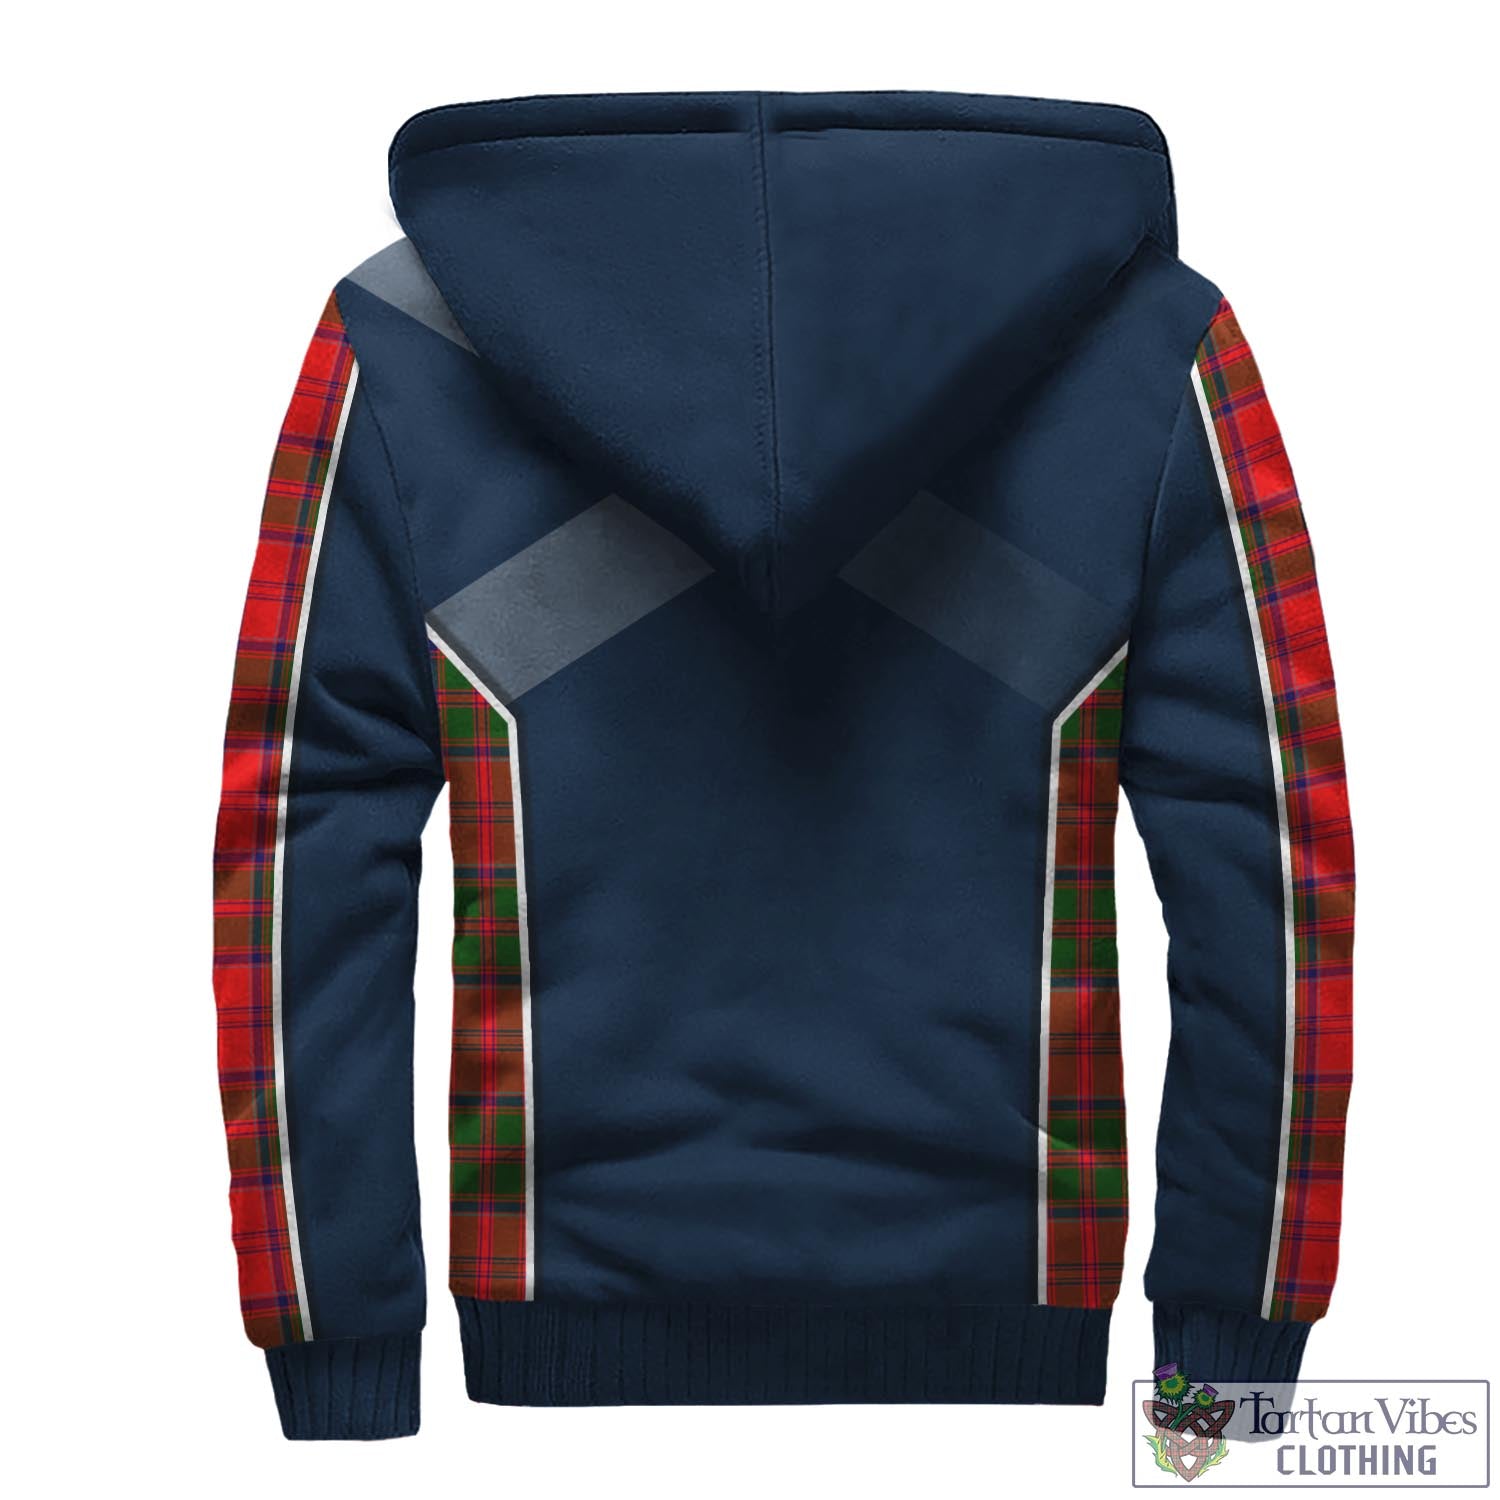 Tartan Vibes Clothing Heron Tartan Sherpa Hoodie with Family Crest and Scottish Thistle Vibes Sport Style